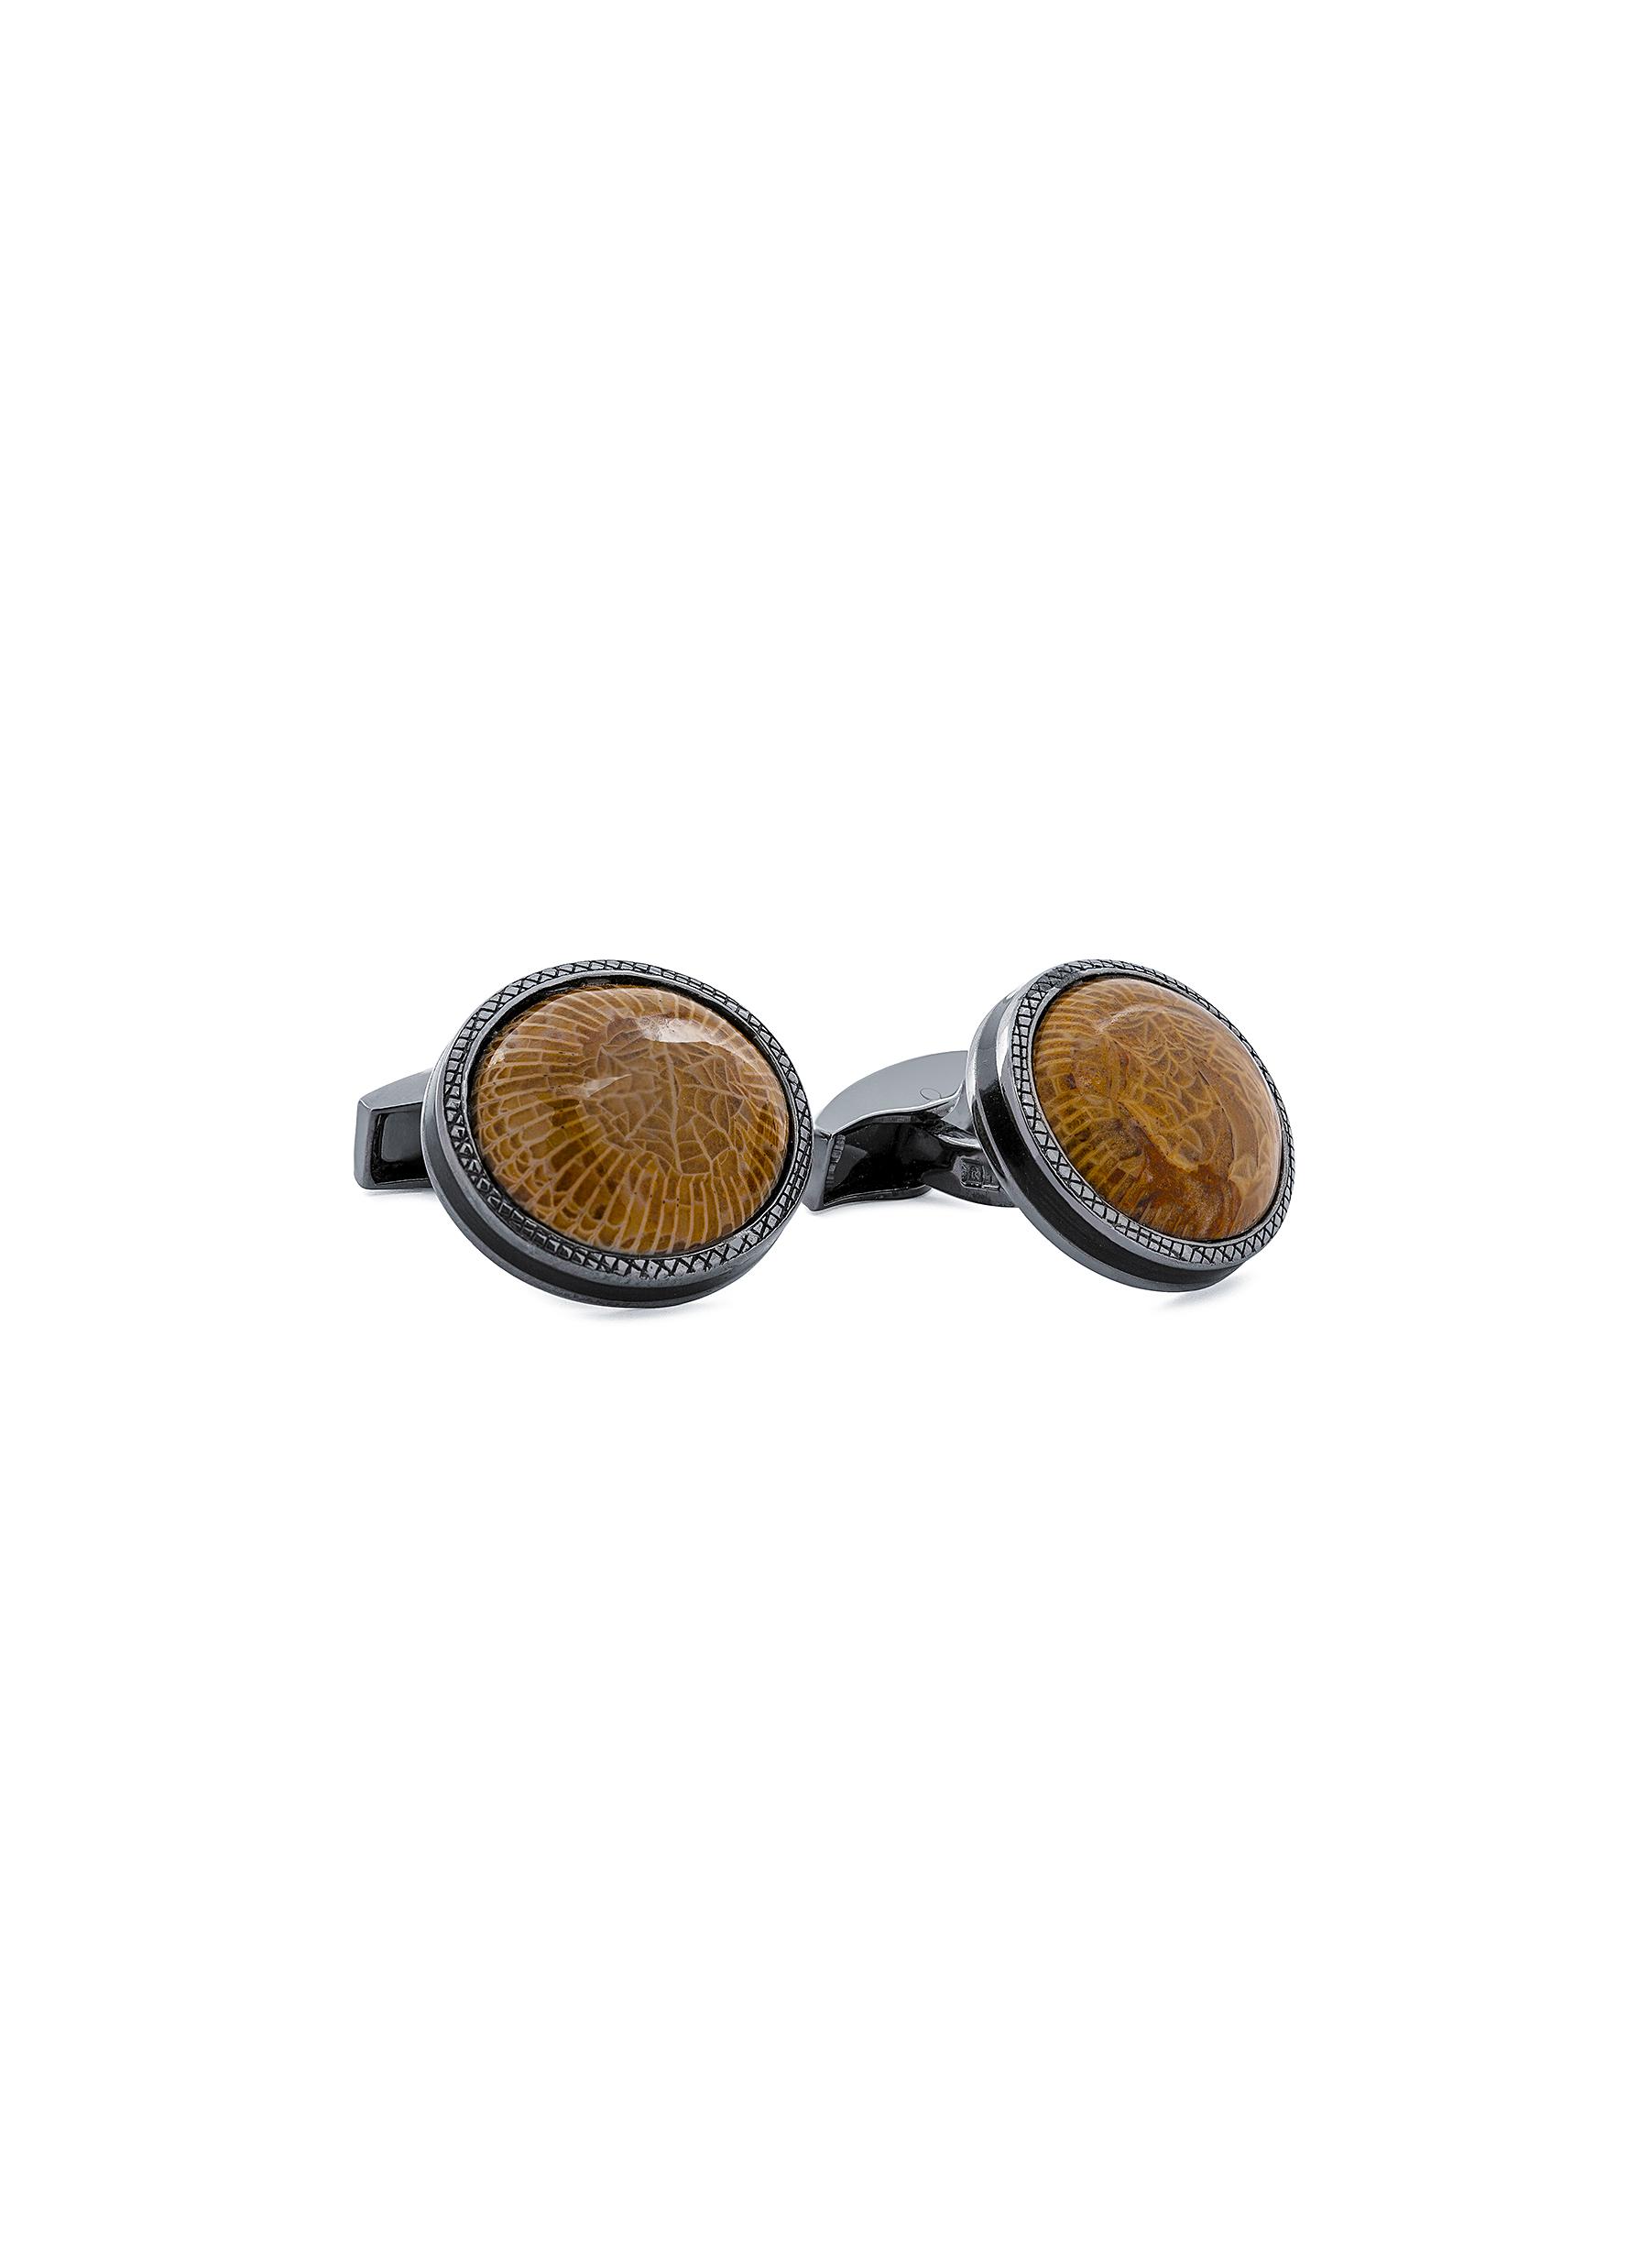 LIMITED EDITION DEVONIAN HORN CORAL STONE RHODIUM PLATED STERLING SILVER BASE CUFFLINKS